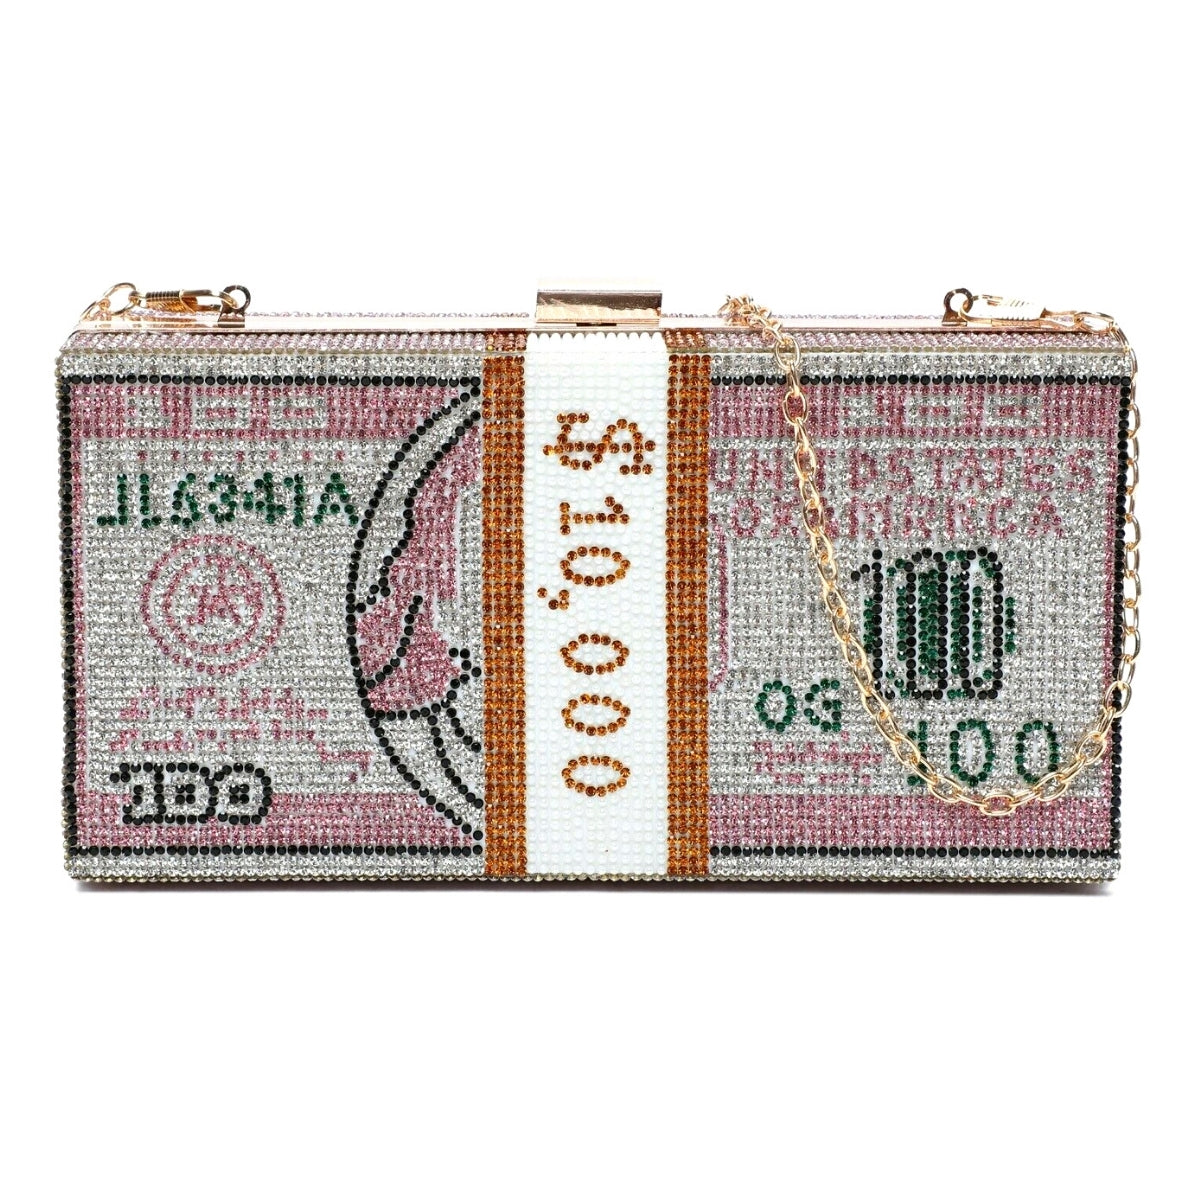 Pink Bling $10K Rectangle Clutch